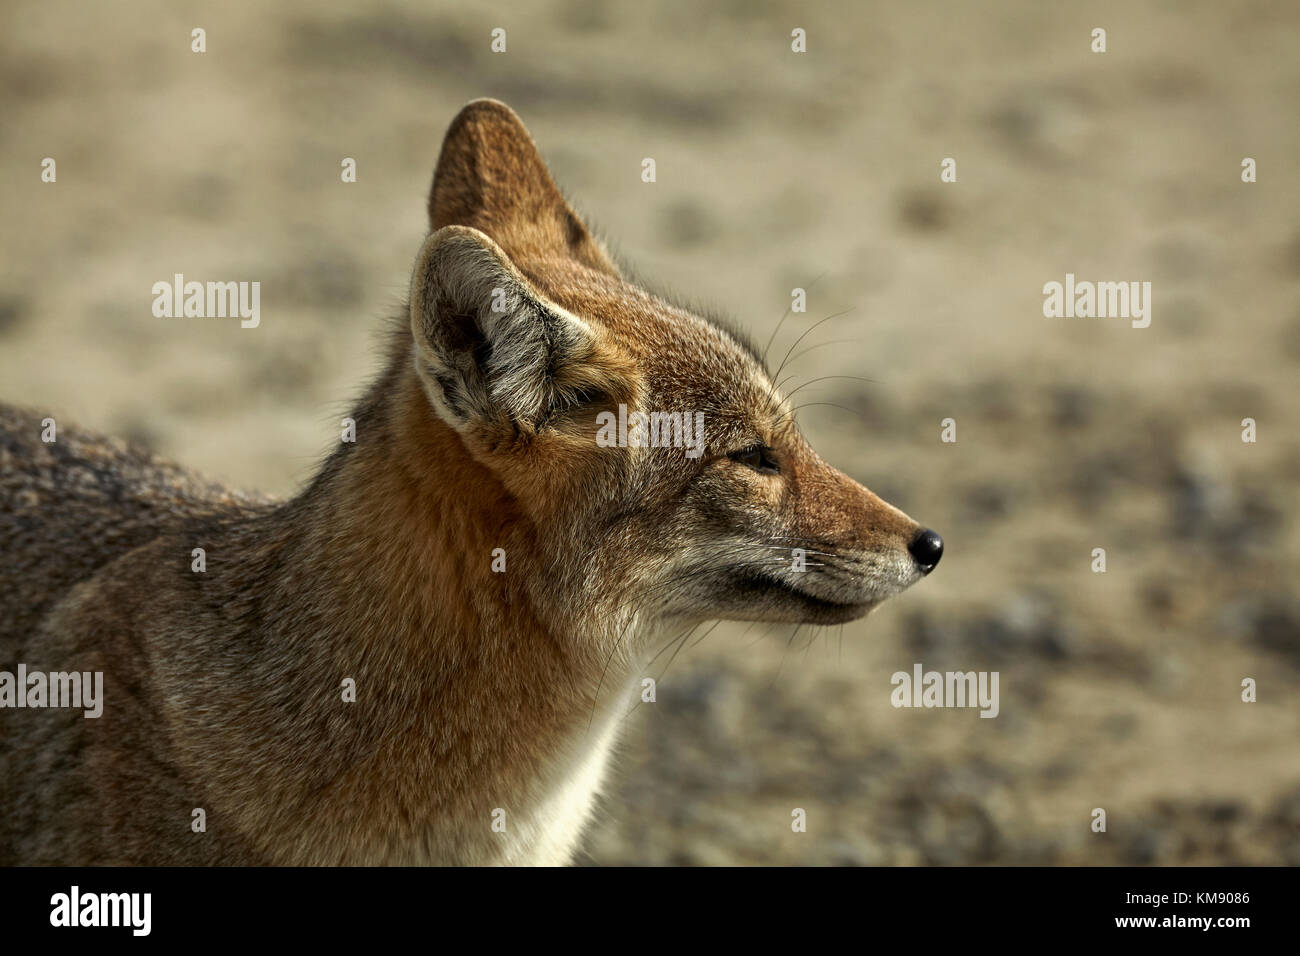 South American gray fox (Lycalopex griseus), Patagonia, Argentina, South America Stock Photo